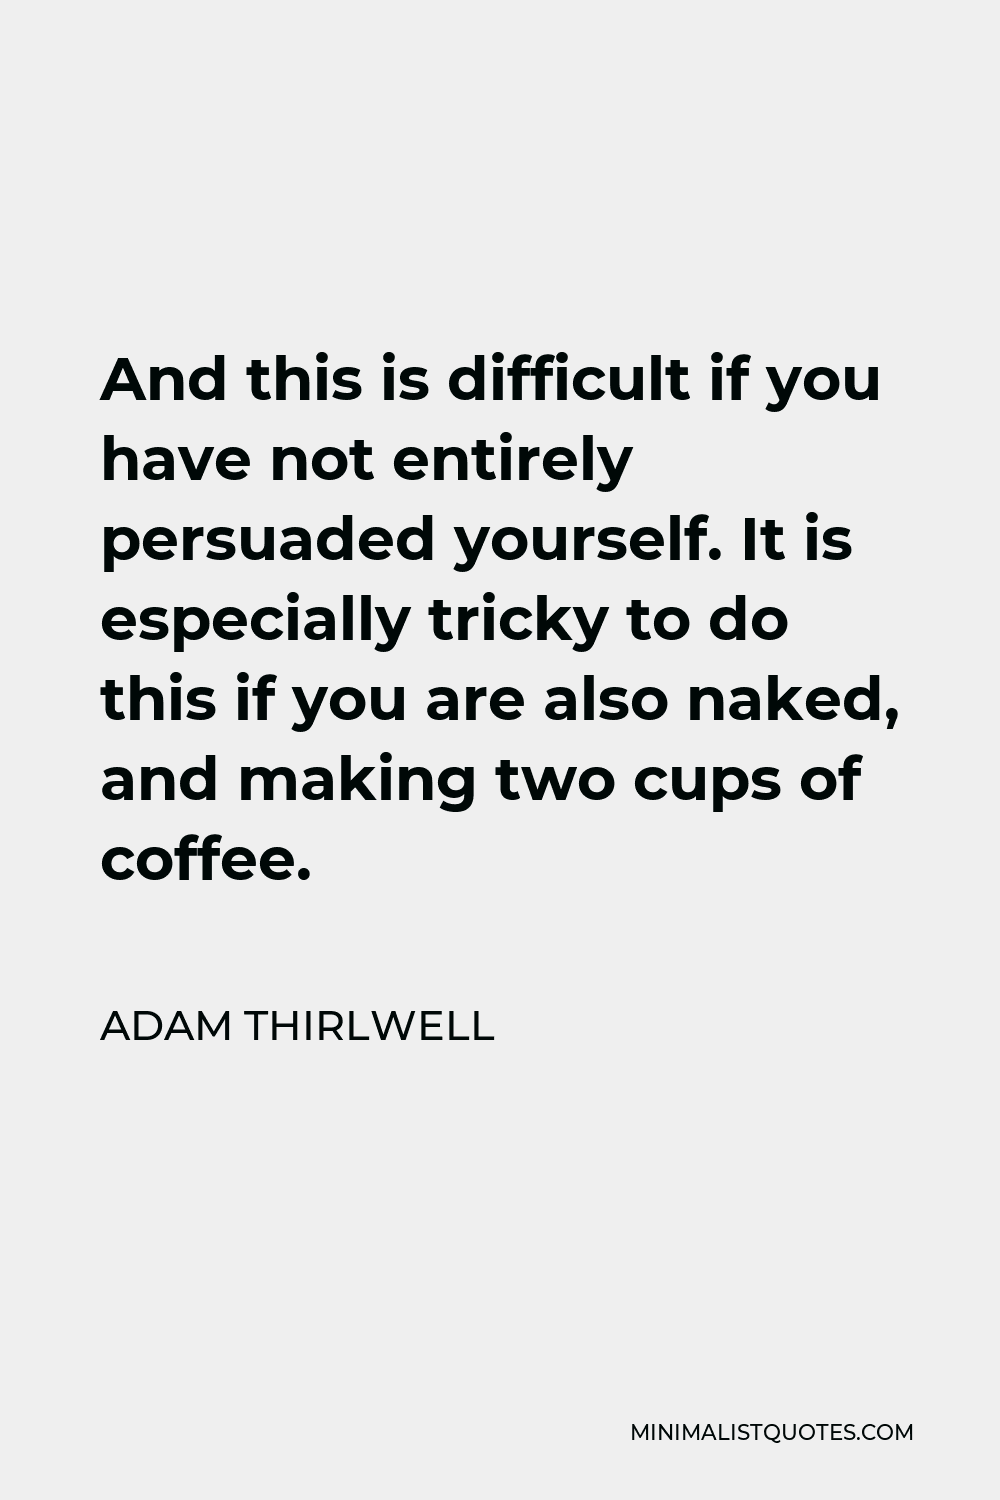 Adam Thirlwell Quote - And this is difficult if you have not entirely persuaded yourself. It is especially tricky to do this if you are also naked, and making two cups of coffee.